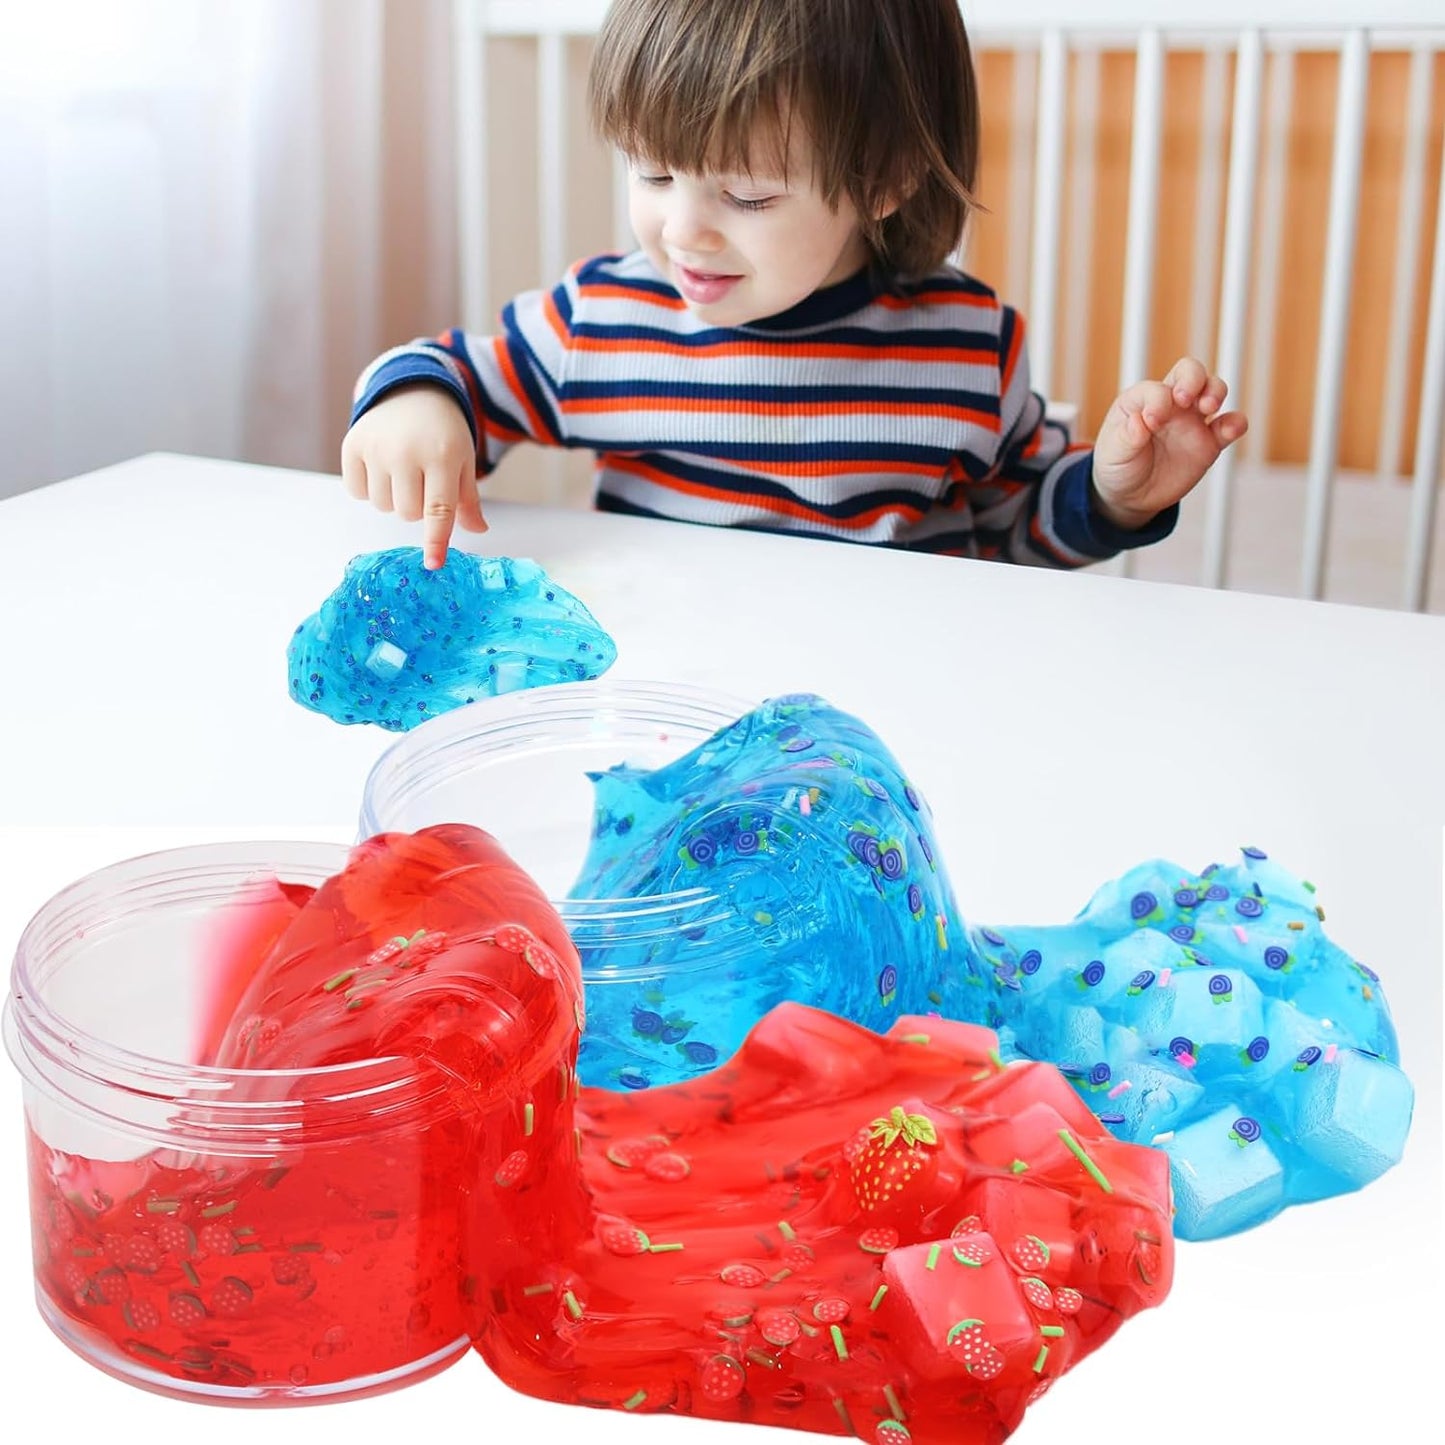 Jelly Cube Clear Slime Kit 8 Pack for Kids, Crunchy Slime, Stress Relief Toy, Party Favors for Girl Boys 6 7 8 9 10 11 12